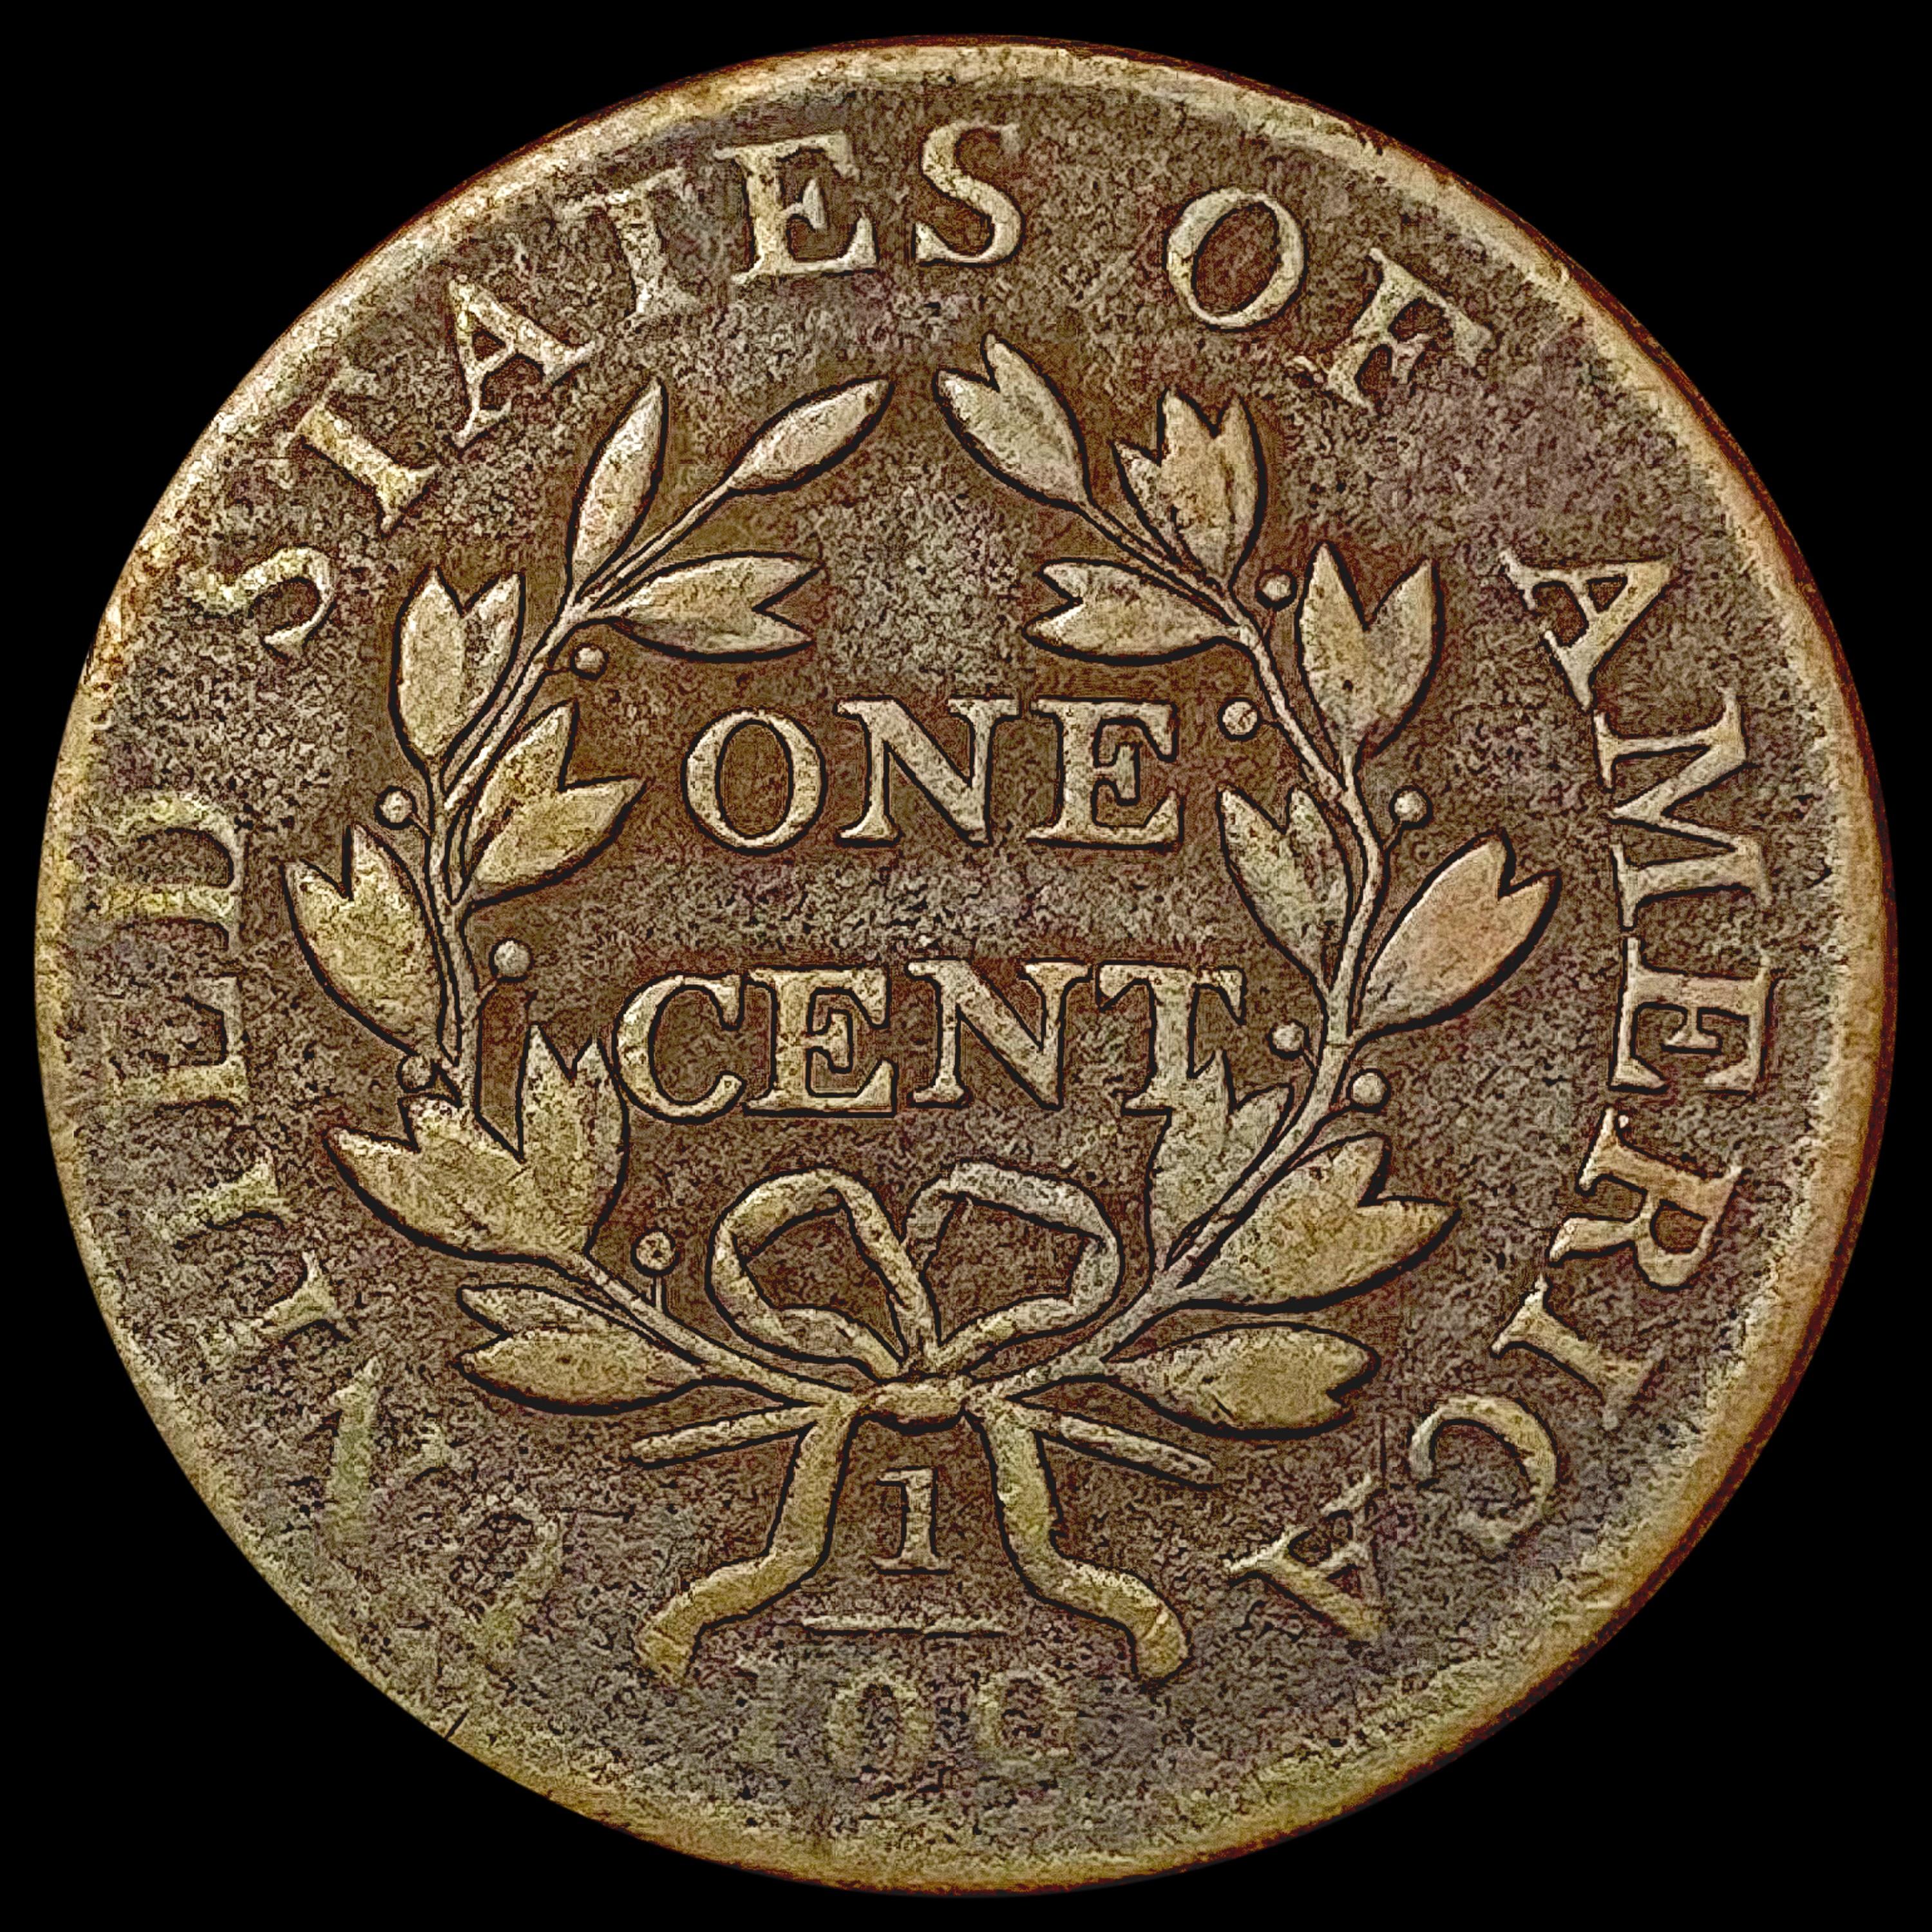 1803 Draped Bust Cent NICELY CIRCULATED